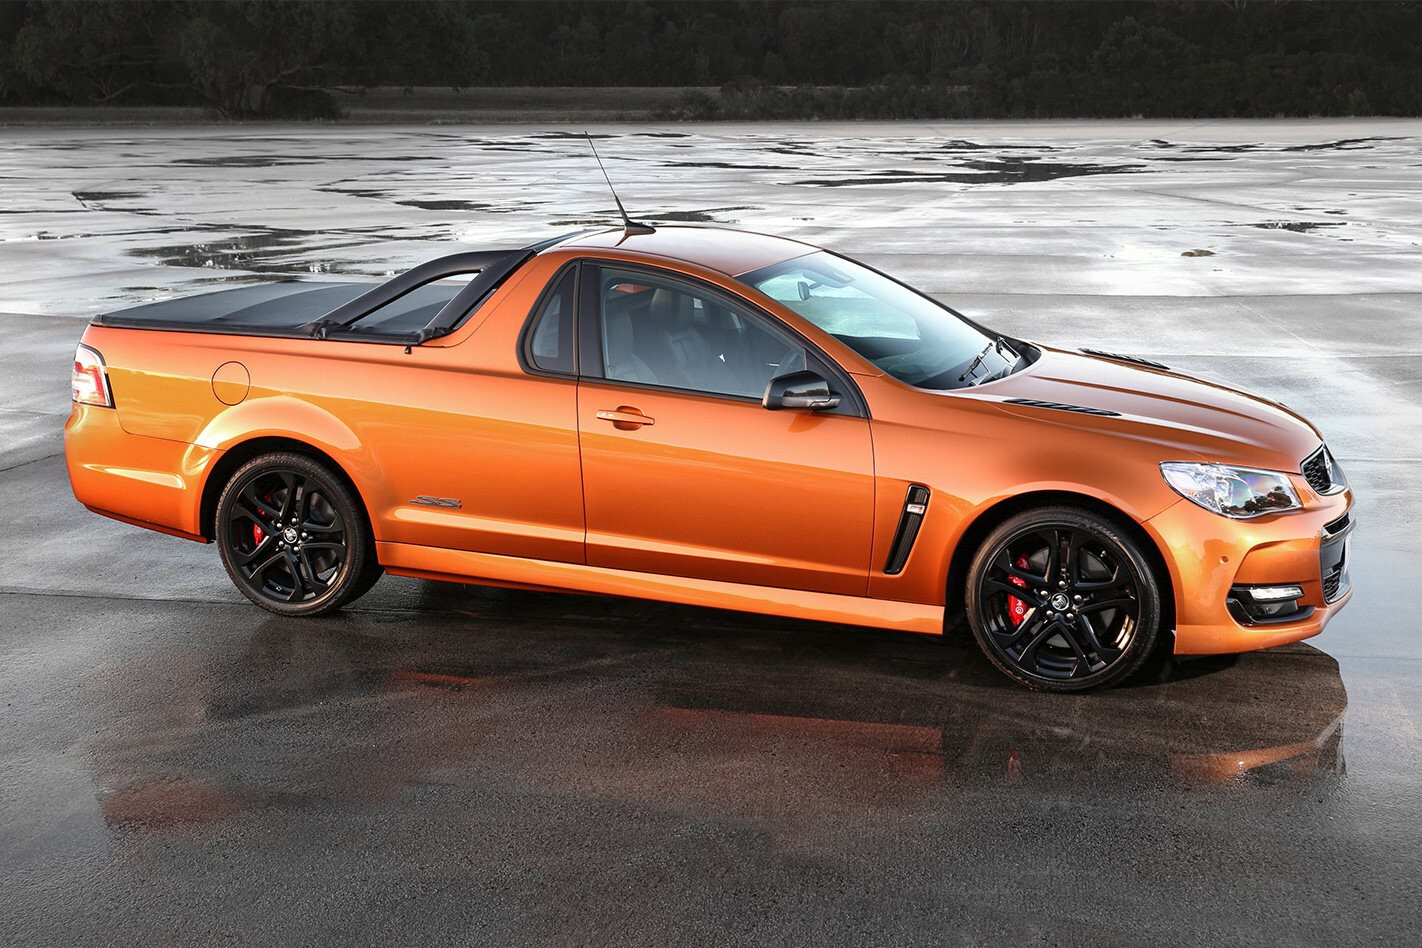 That’s it Holden Ute sells out ahead of 2018 Commodore’s launch